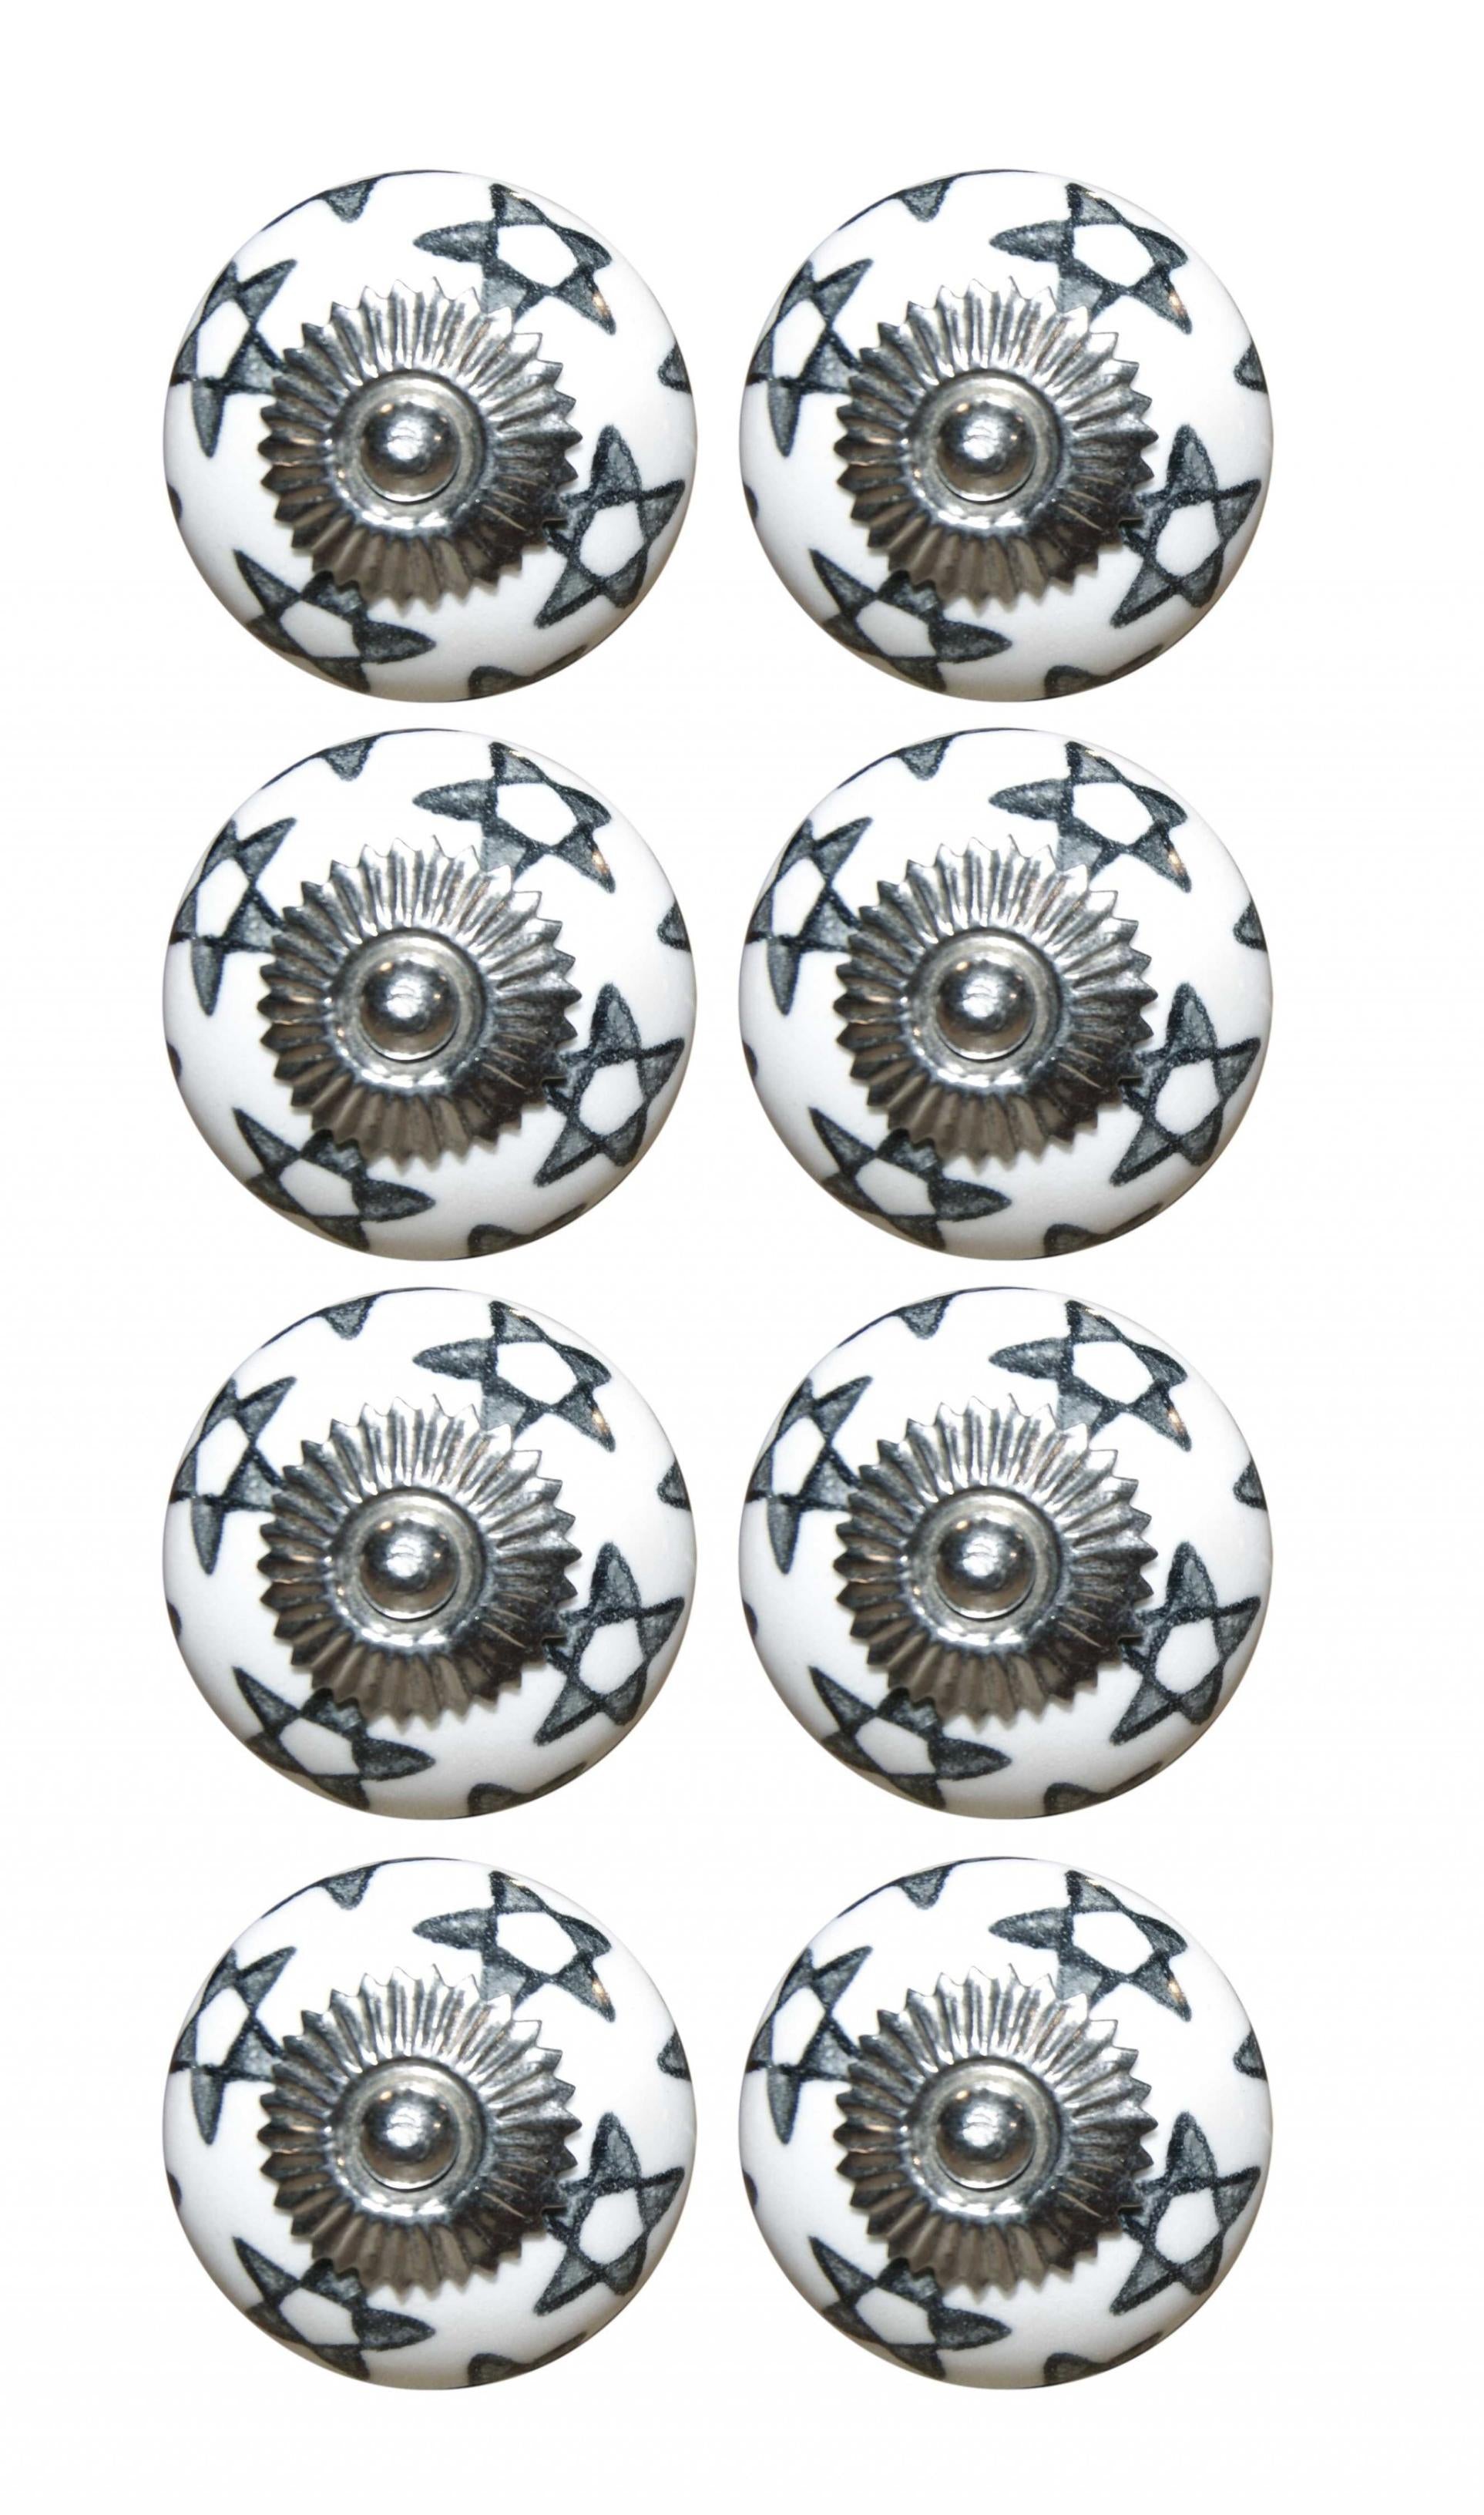 1.5" X 1.5" X 1.5" White Silver And Gray Knobs 8 Pack